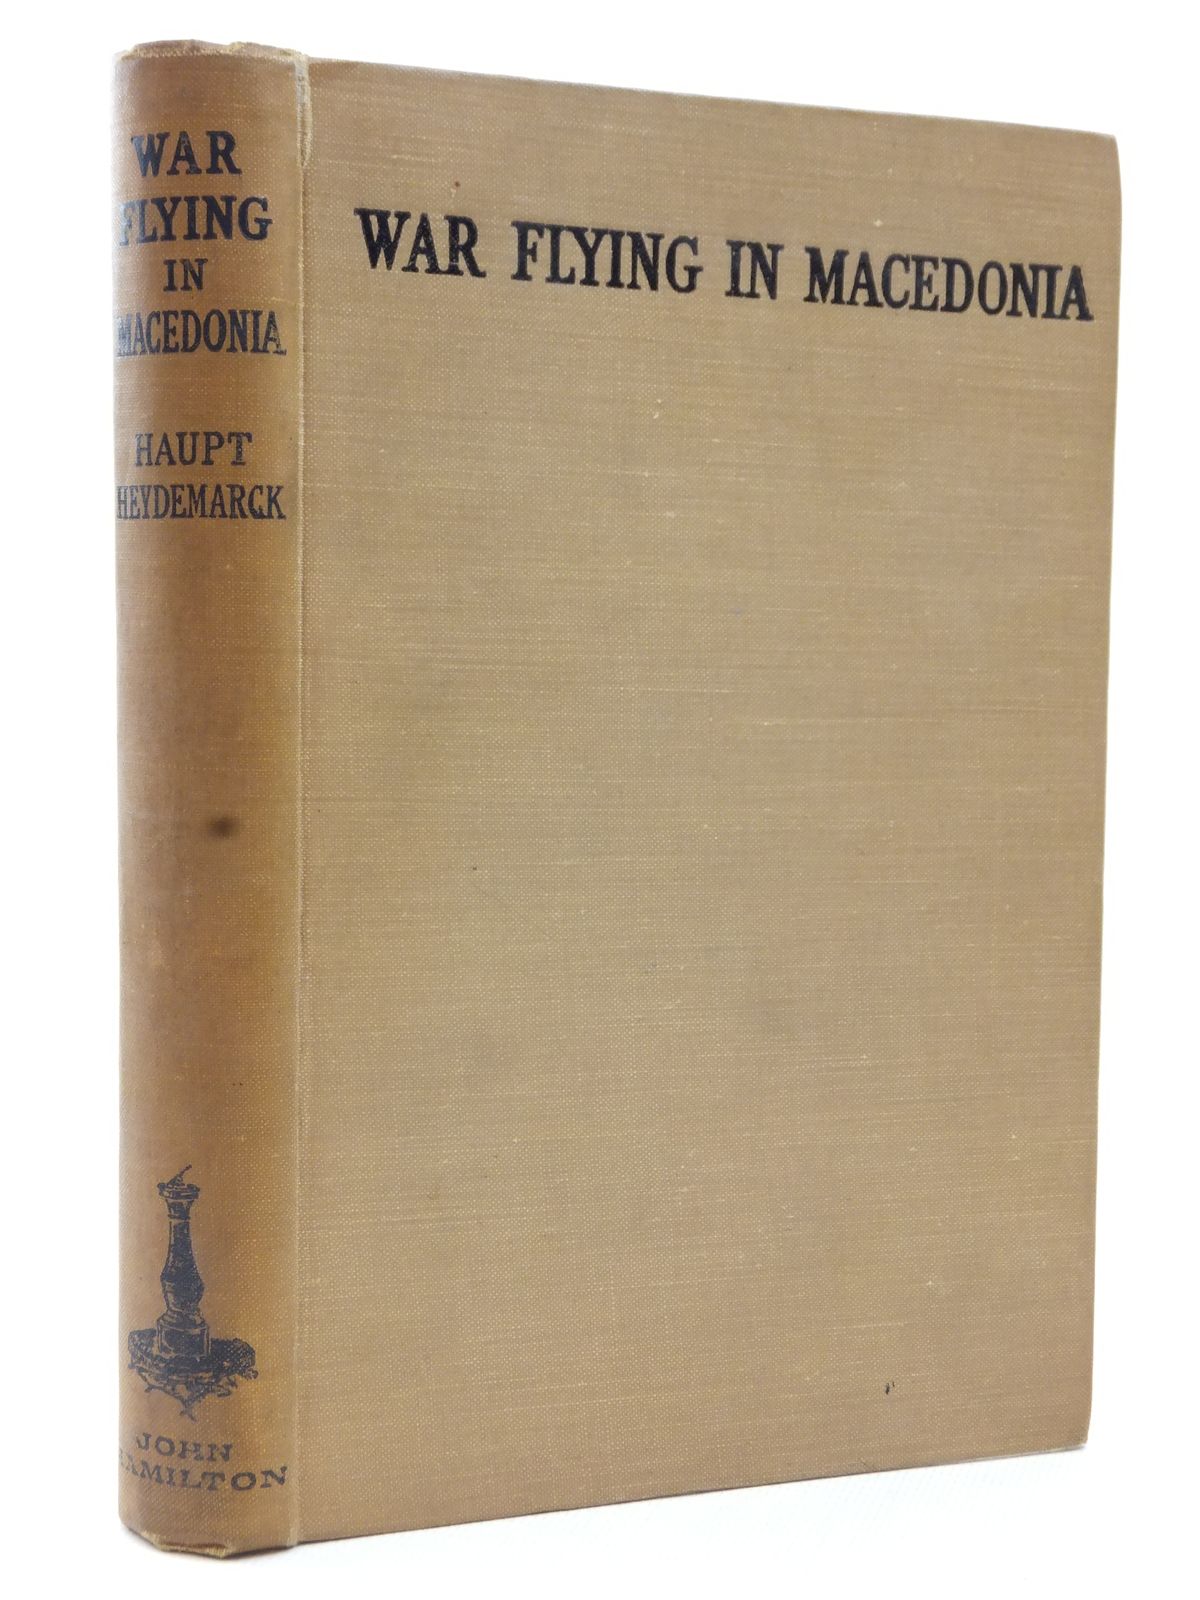 Photo of WAR FLYING IN MACEDONIA written by Heydemarck, Haupt published by John Hamilton Ltd. (STOCK CODE: 2123192)  for sale by Stella & Rose's Books